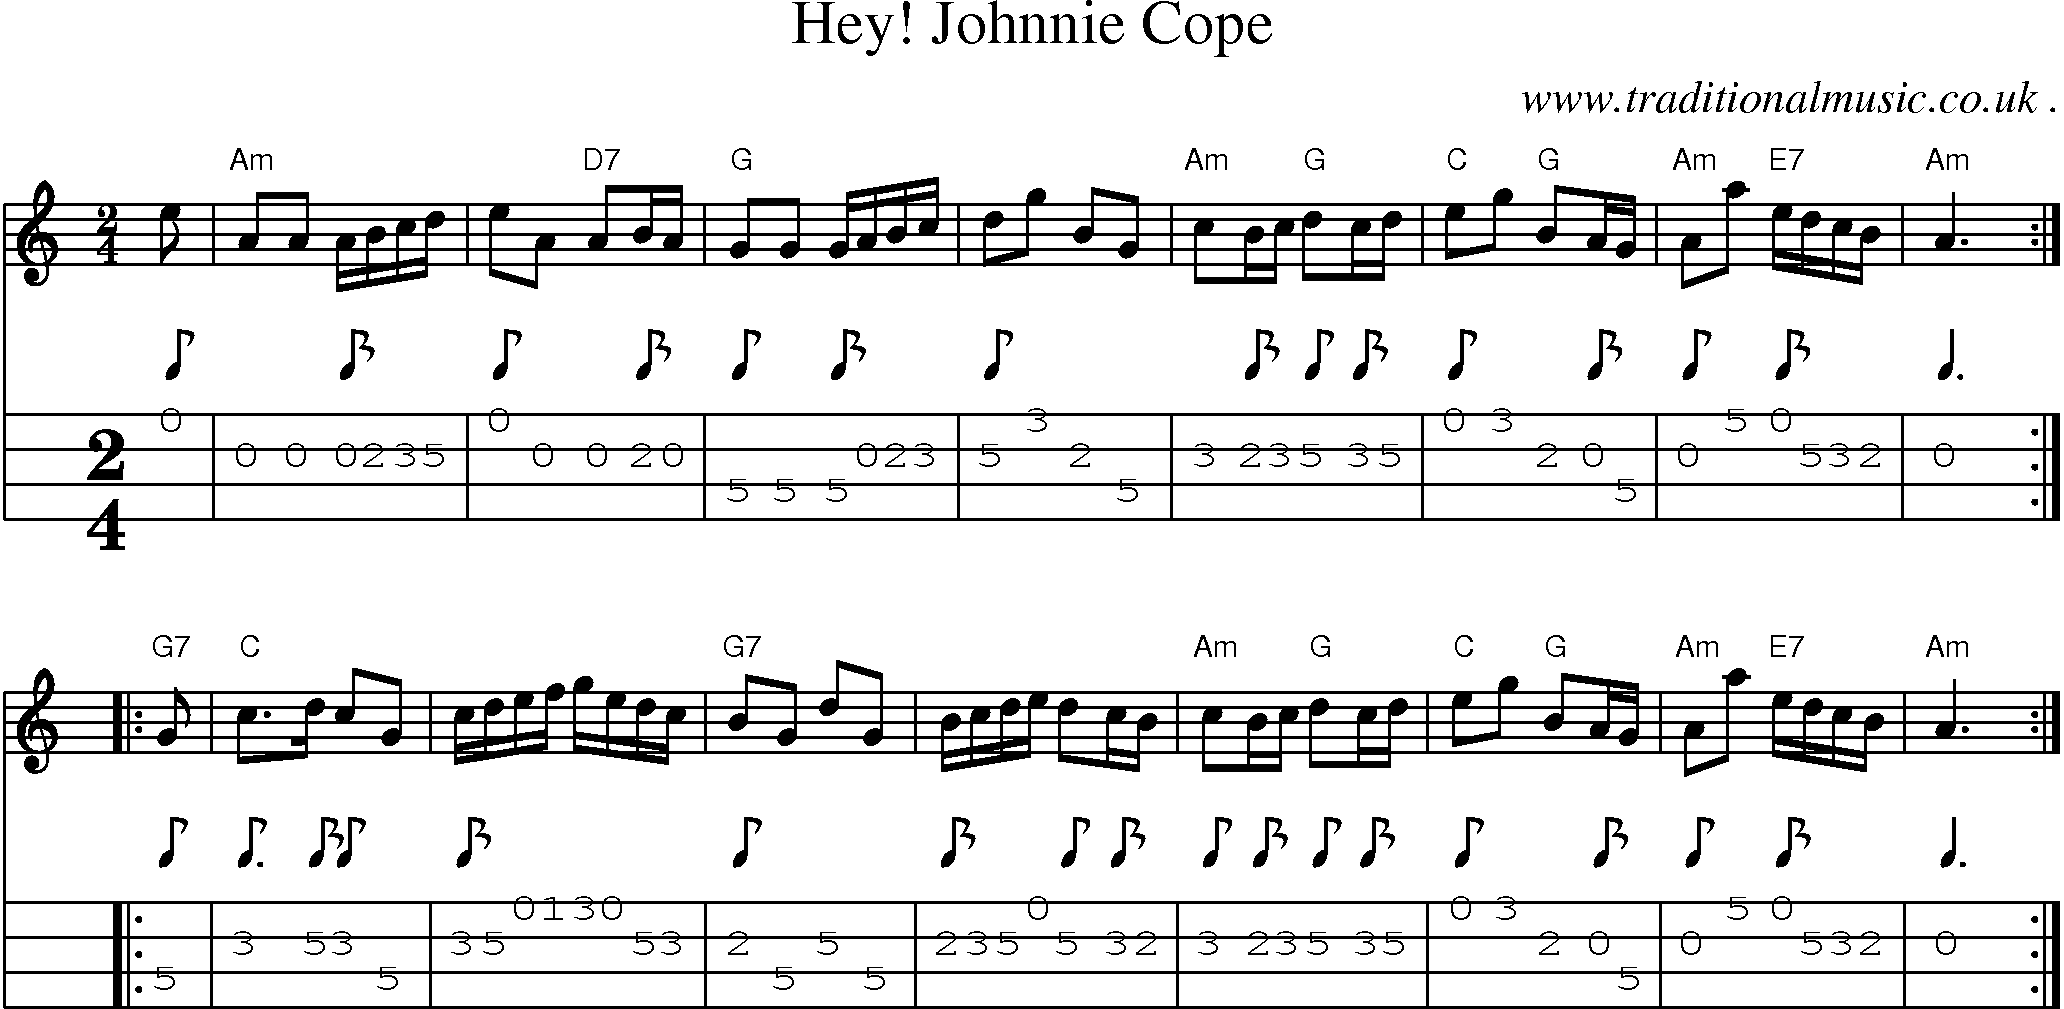 Sheet-music  score, Chords and Mandolin Tabs for Hey! Johnnie Cope